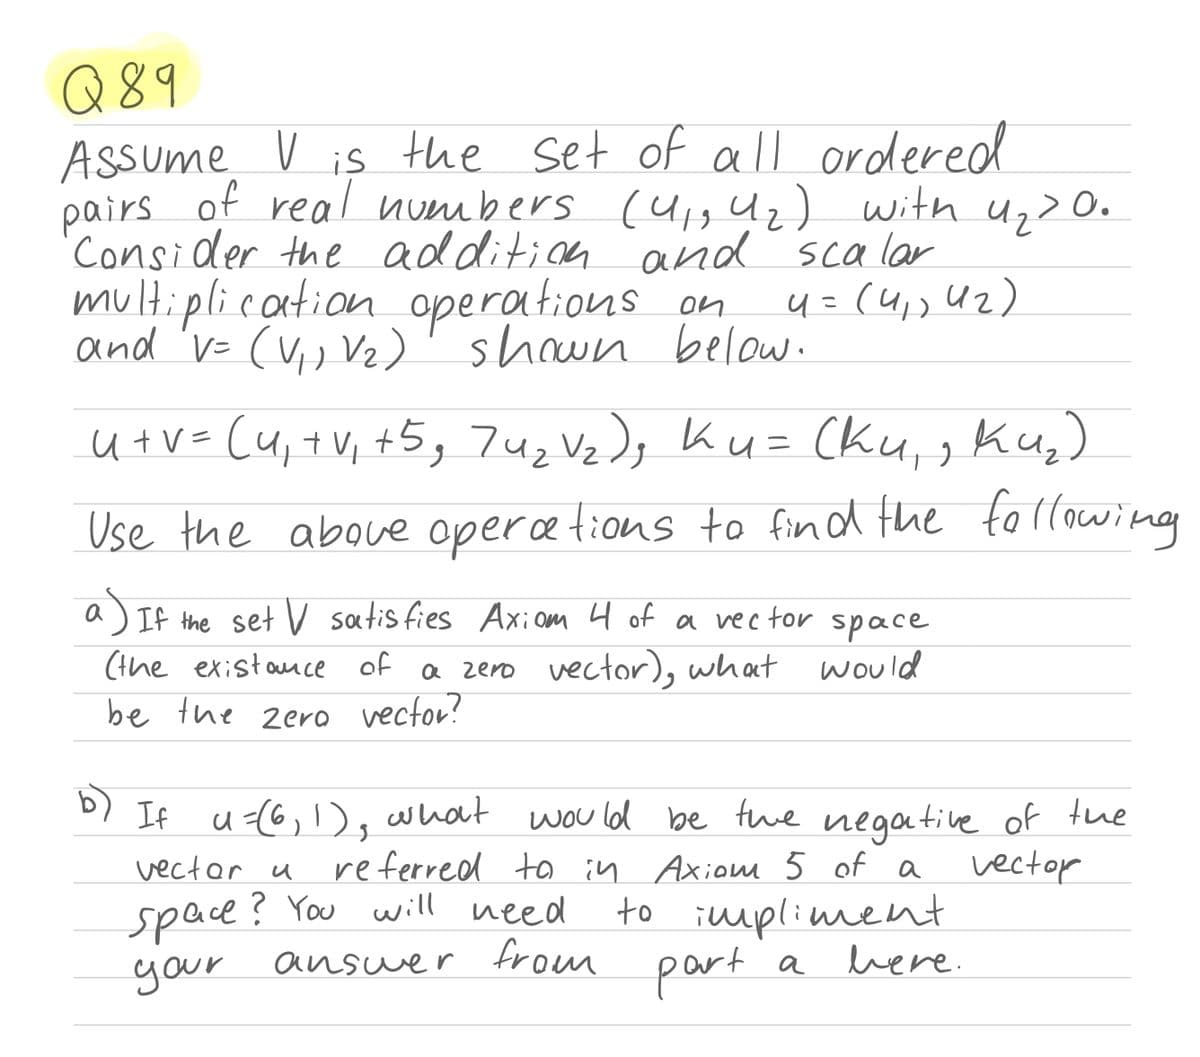 Q89
Assume V is
of real numbers (u1g Uz) with u,> 0.
the set of all ordered
pairs
'Consider the additicn and scalar
multiplication operations on
and 'v= (V,, Vz)'shown below.
4 =(4,, U2)
u tV= (u,+V, +5, 7uz Vz); Ku= Cku,, Ku,)
fottowing
Use the aboue opercetions to fin d the
If the set V satis fies Axiom 4 of a vec tor space
(the existance of a zero vector), what would
be the zero vector?
b)
D) If u<(6,1), what
vectar u
wou ld be tuwe negative of the
vector
referred ta in Axionm 5 of a
space? You will need
answer from
to impliment
here.
part
a
your
